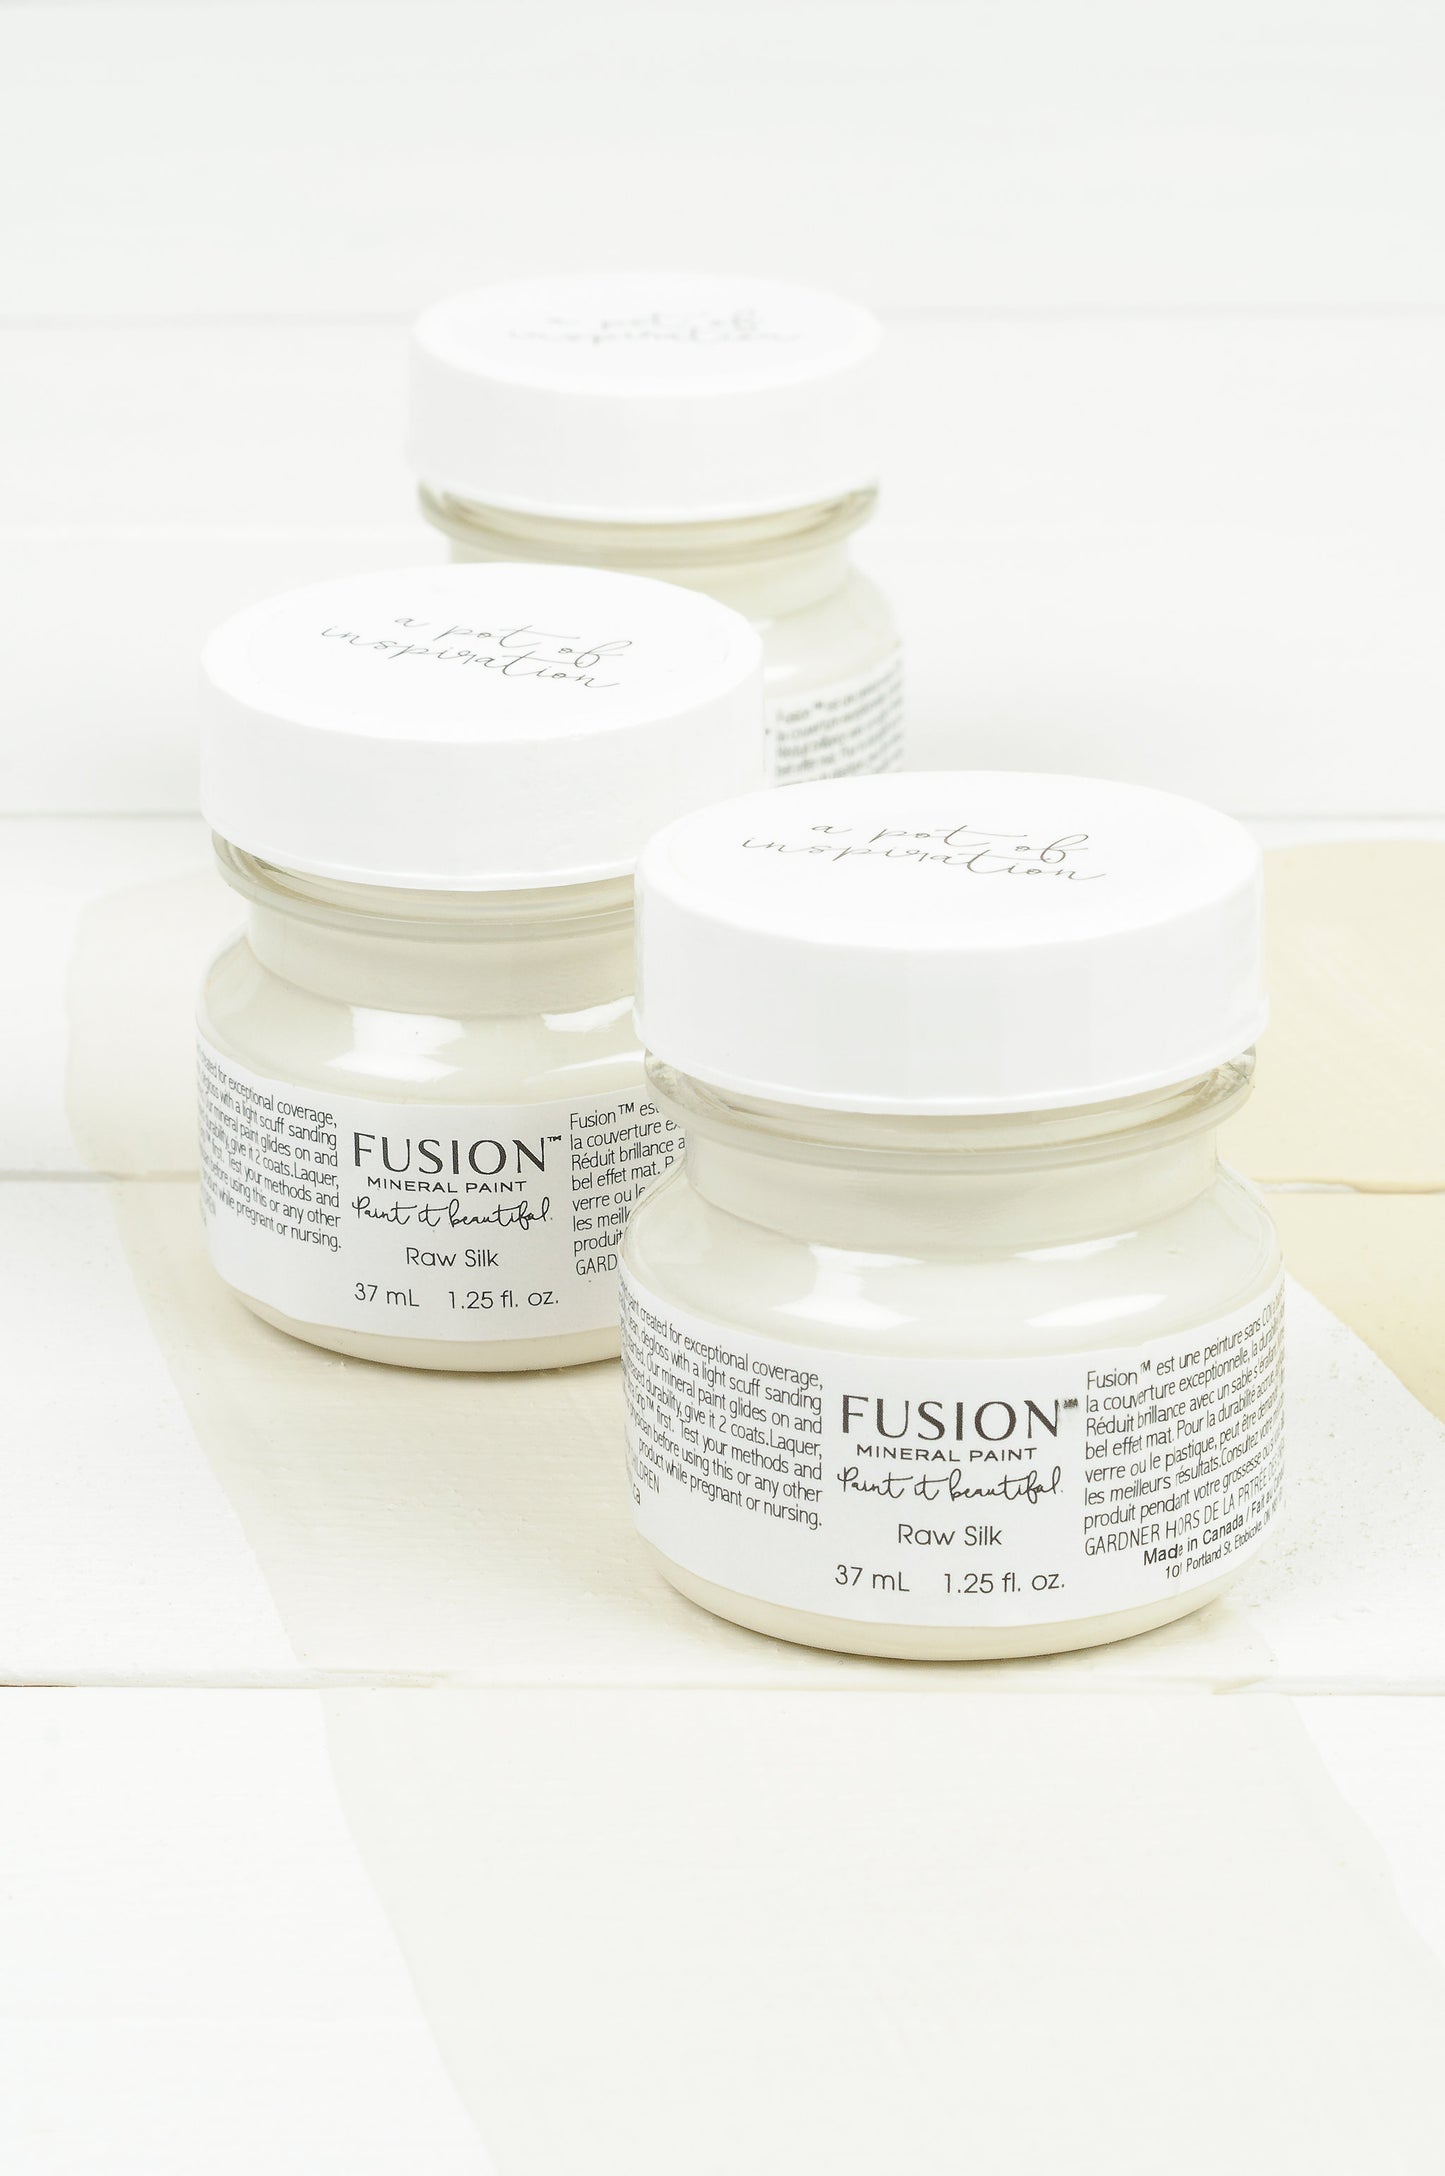 Raw Silk - Fusion Mineral Paint Paint > Fusion Mineral Paint > Furniture Paint 37ml